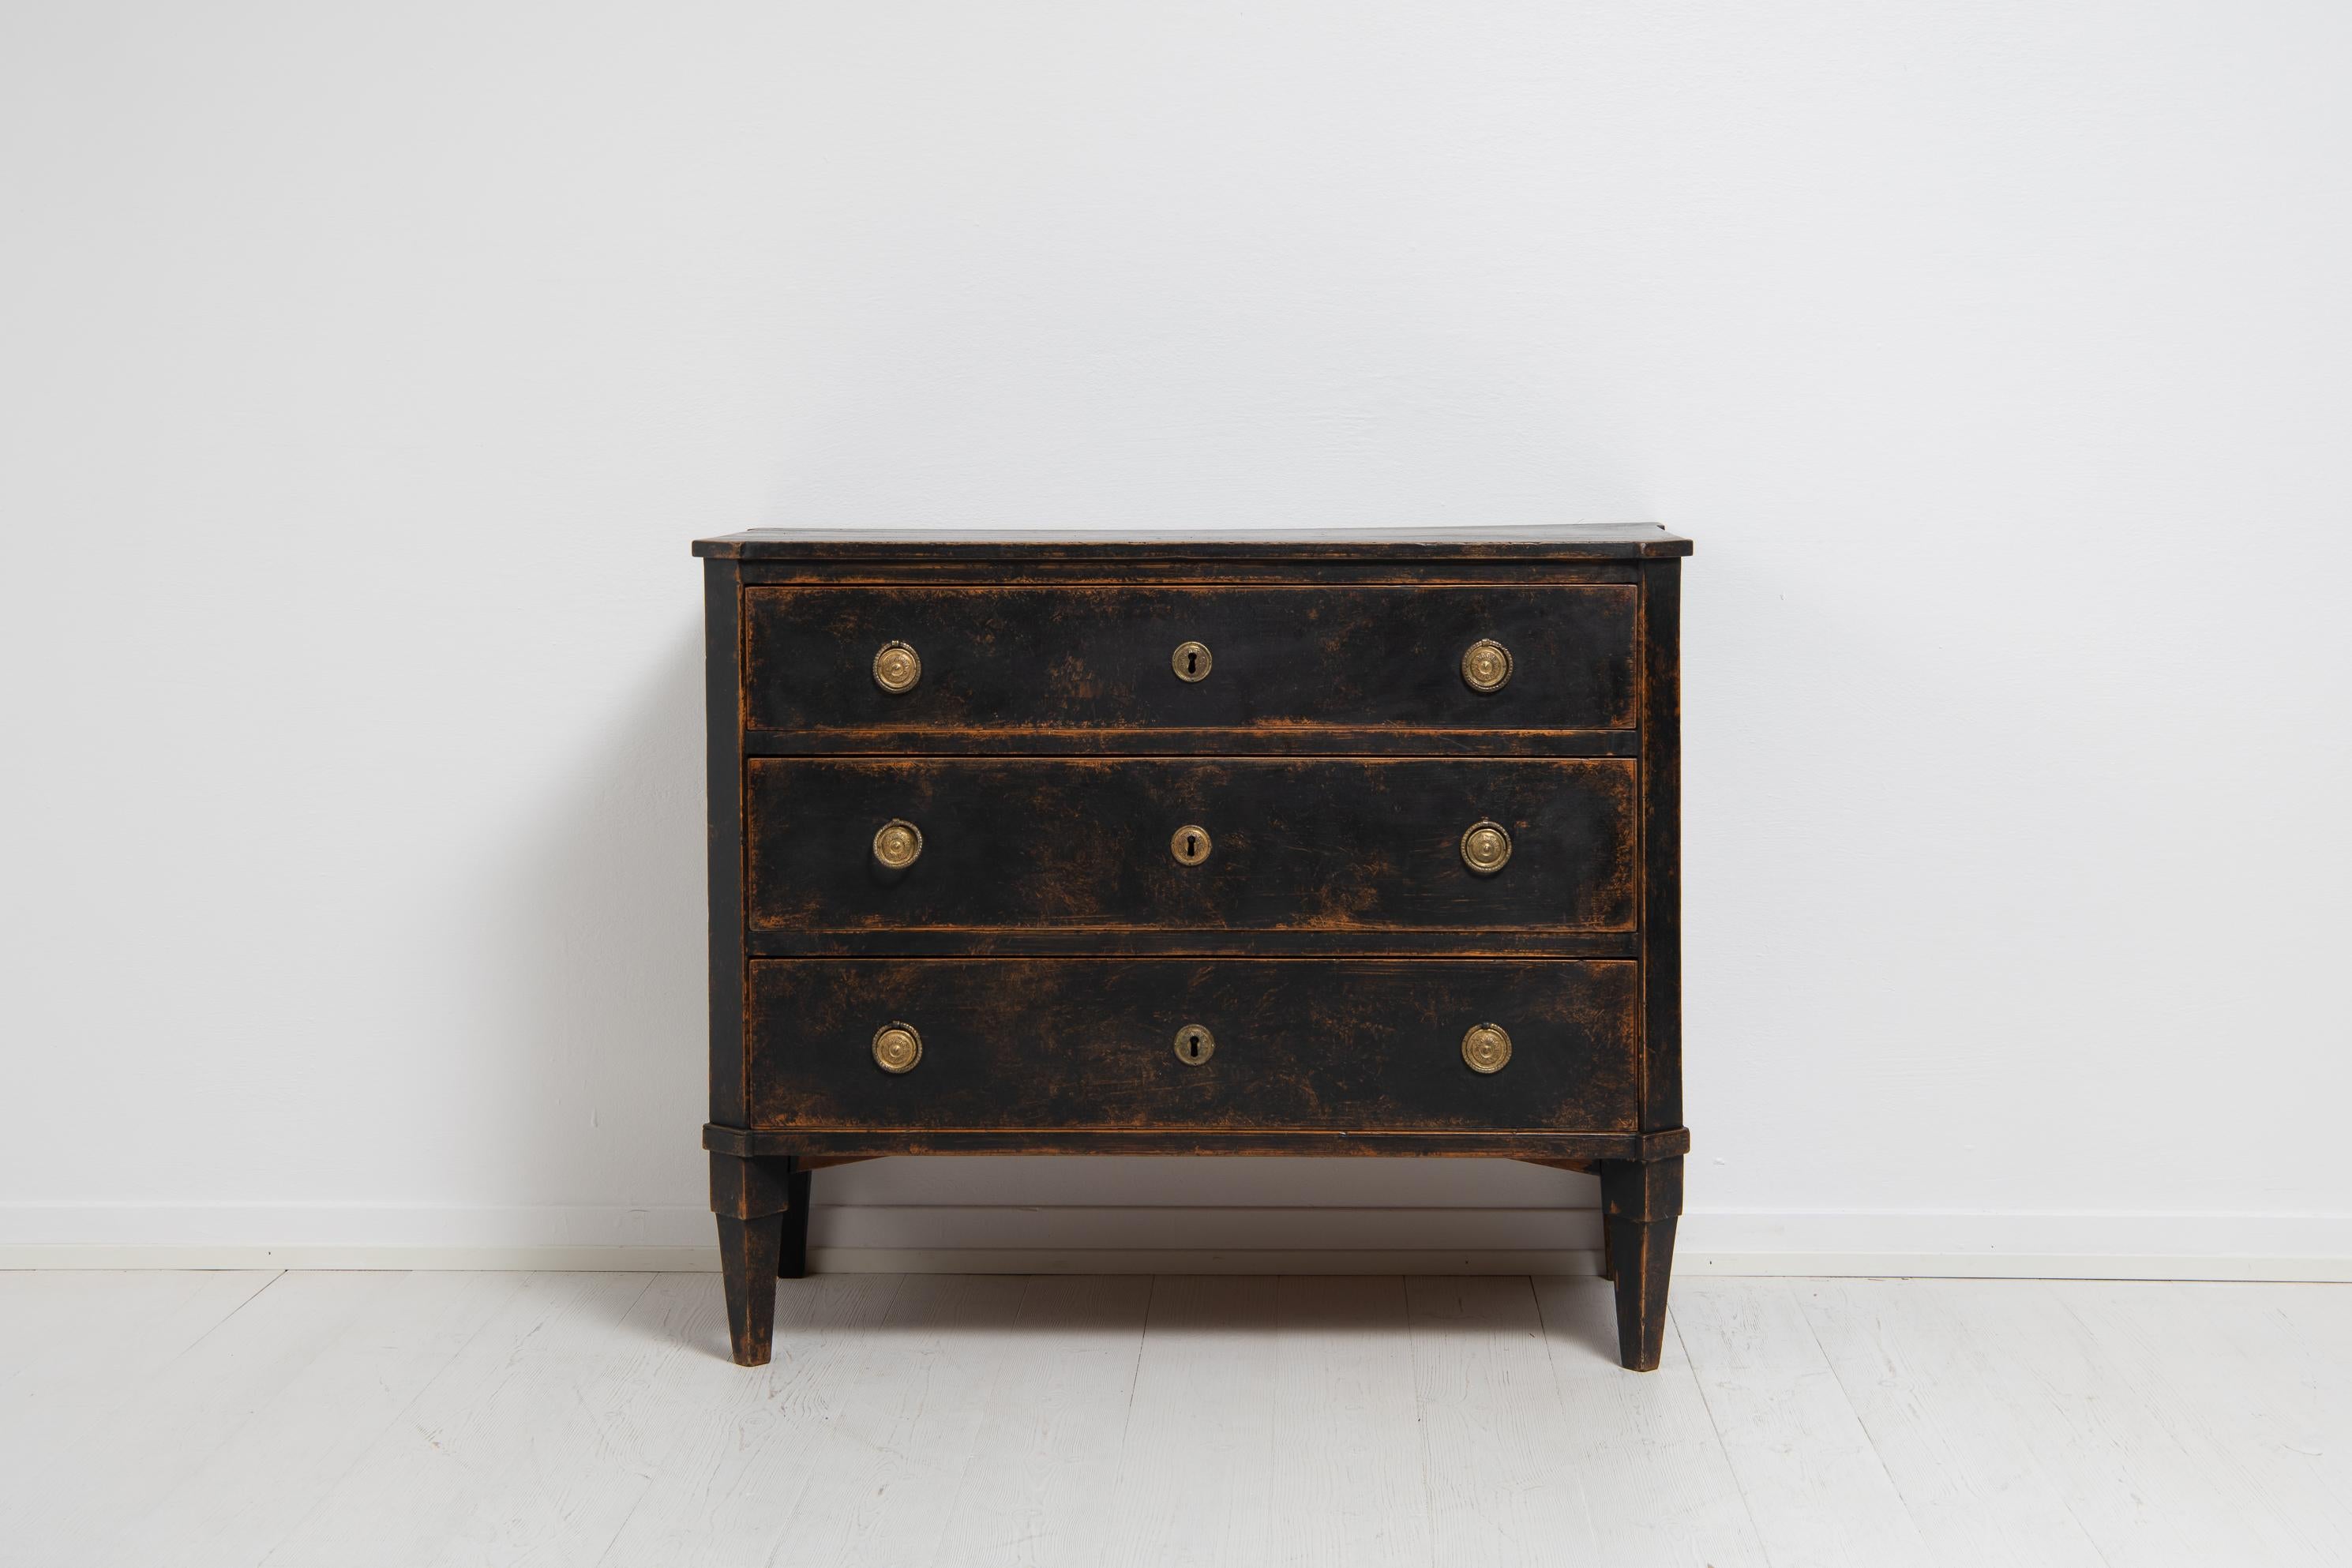 Northern Sweden Gustavian chest of drawers with black paint. The chest is from between 1790 and 1800 and made in Swedish pine. The chest has the Classic Gustavian proportions and designs with straight lines and minimal decor. Such as the slanted